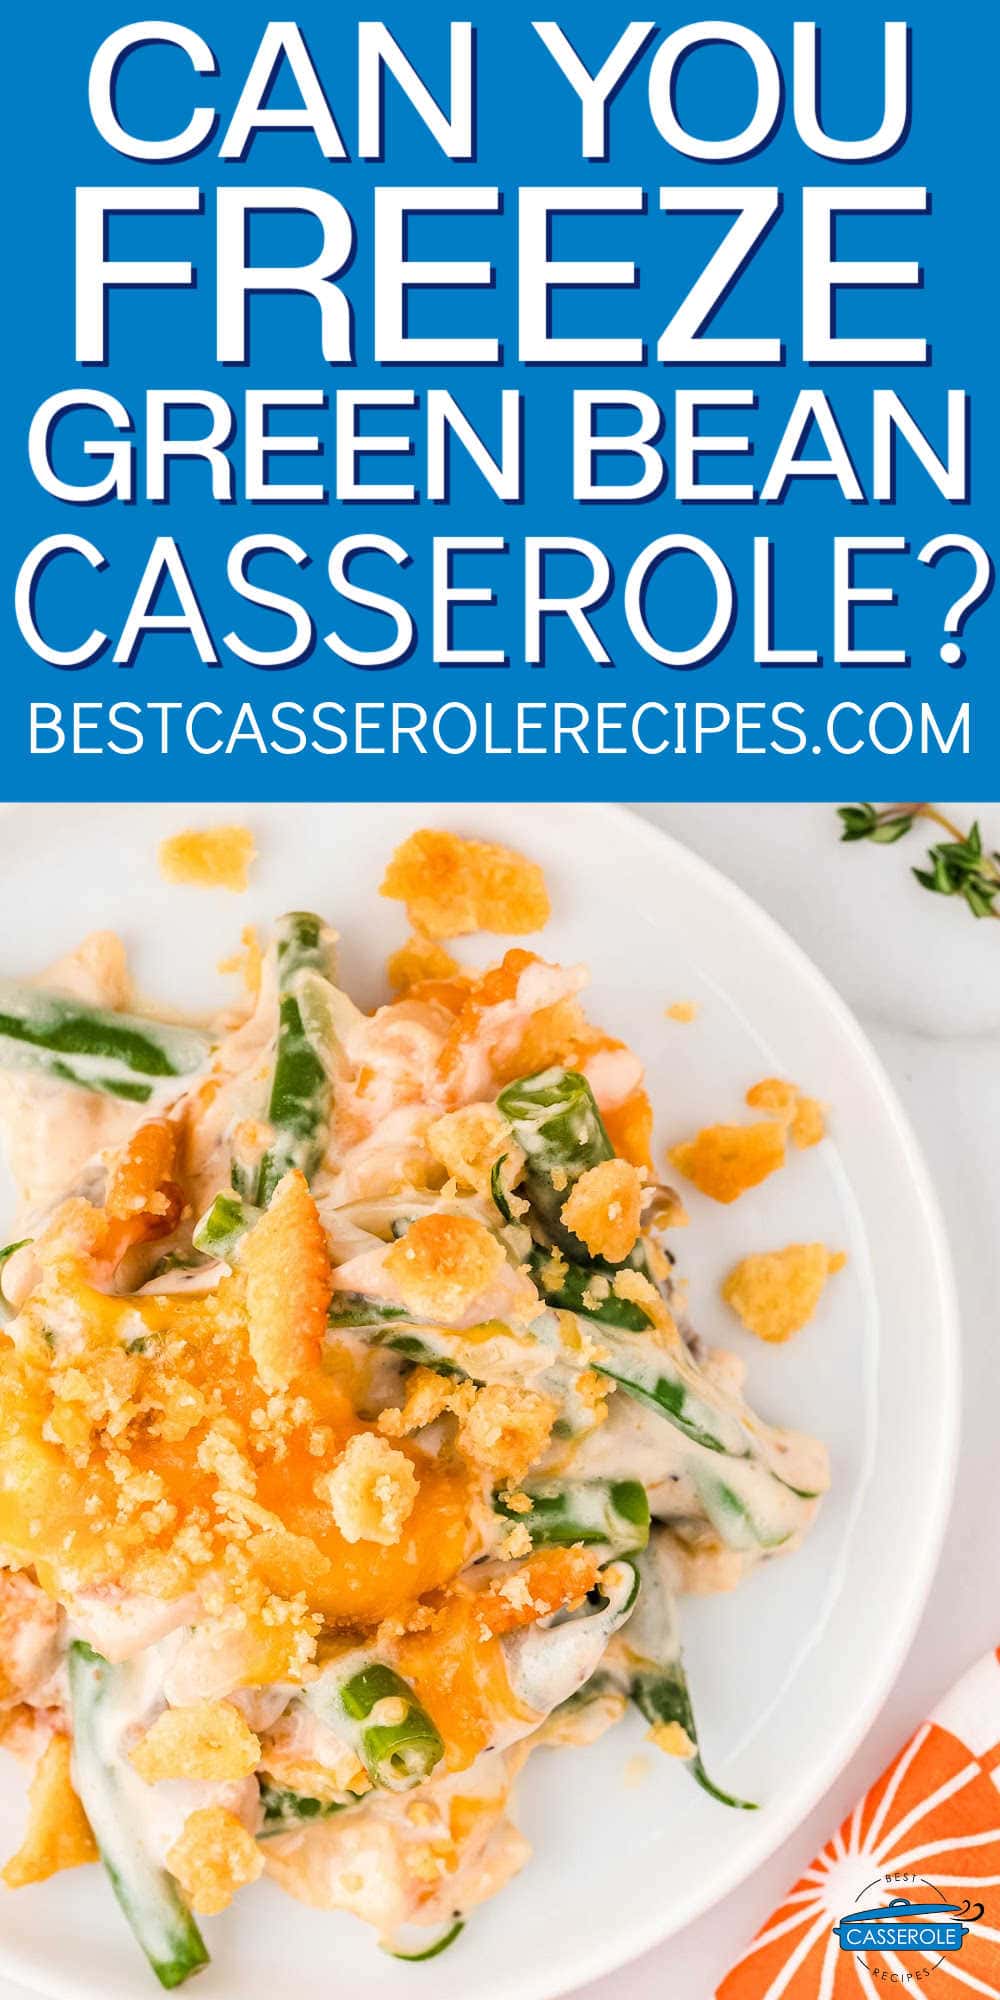 plate of casserole with text and blue banner